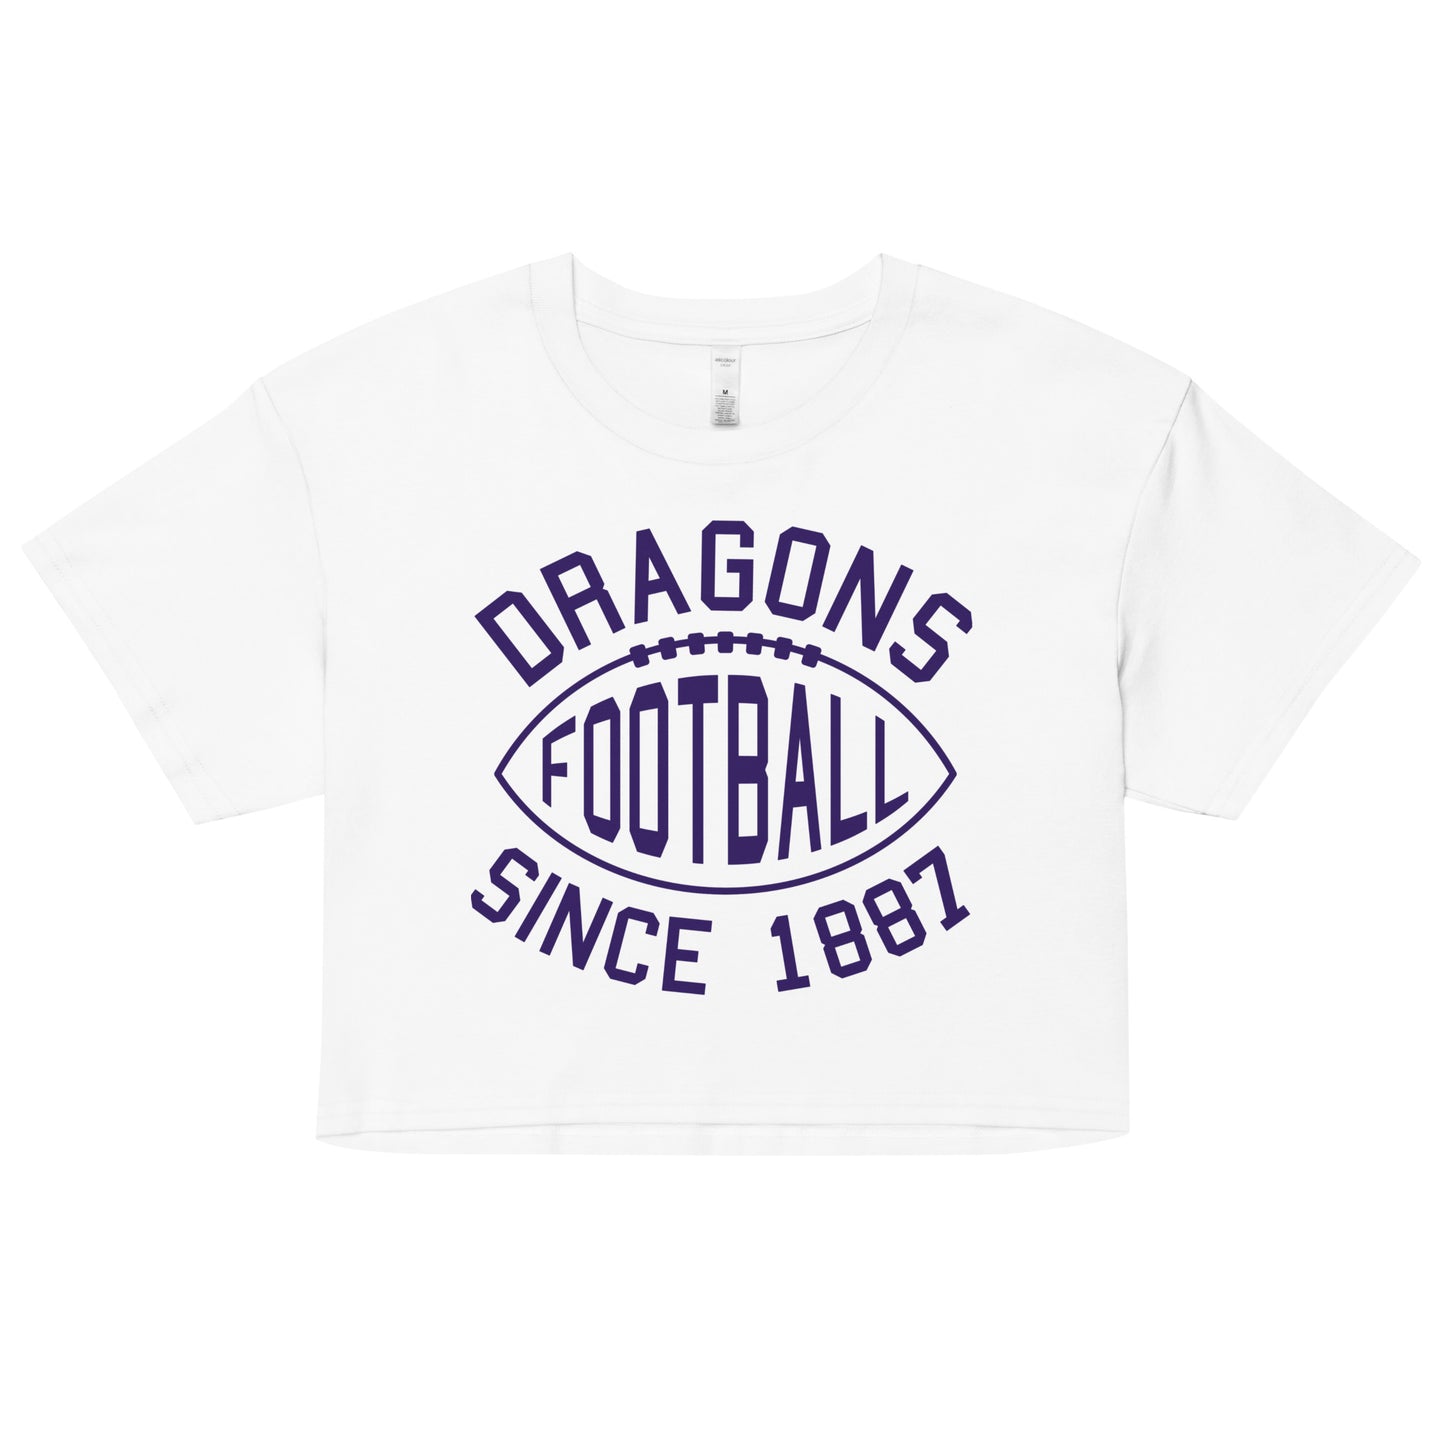 Dragons Football Cropped Tee